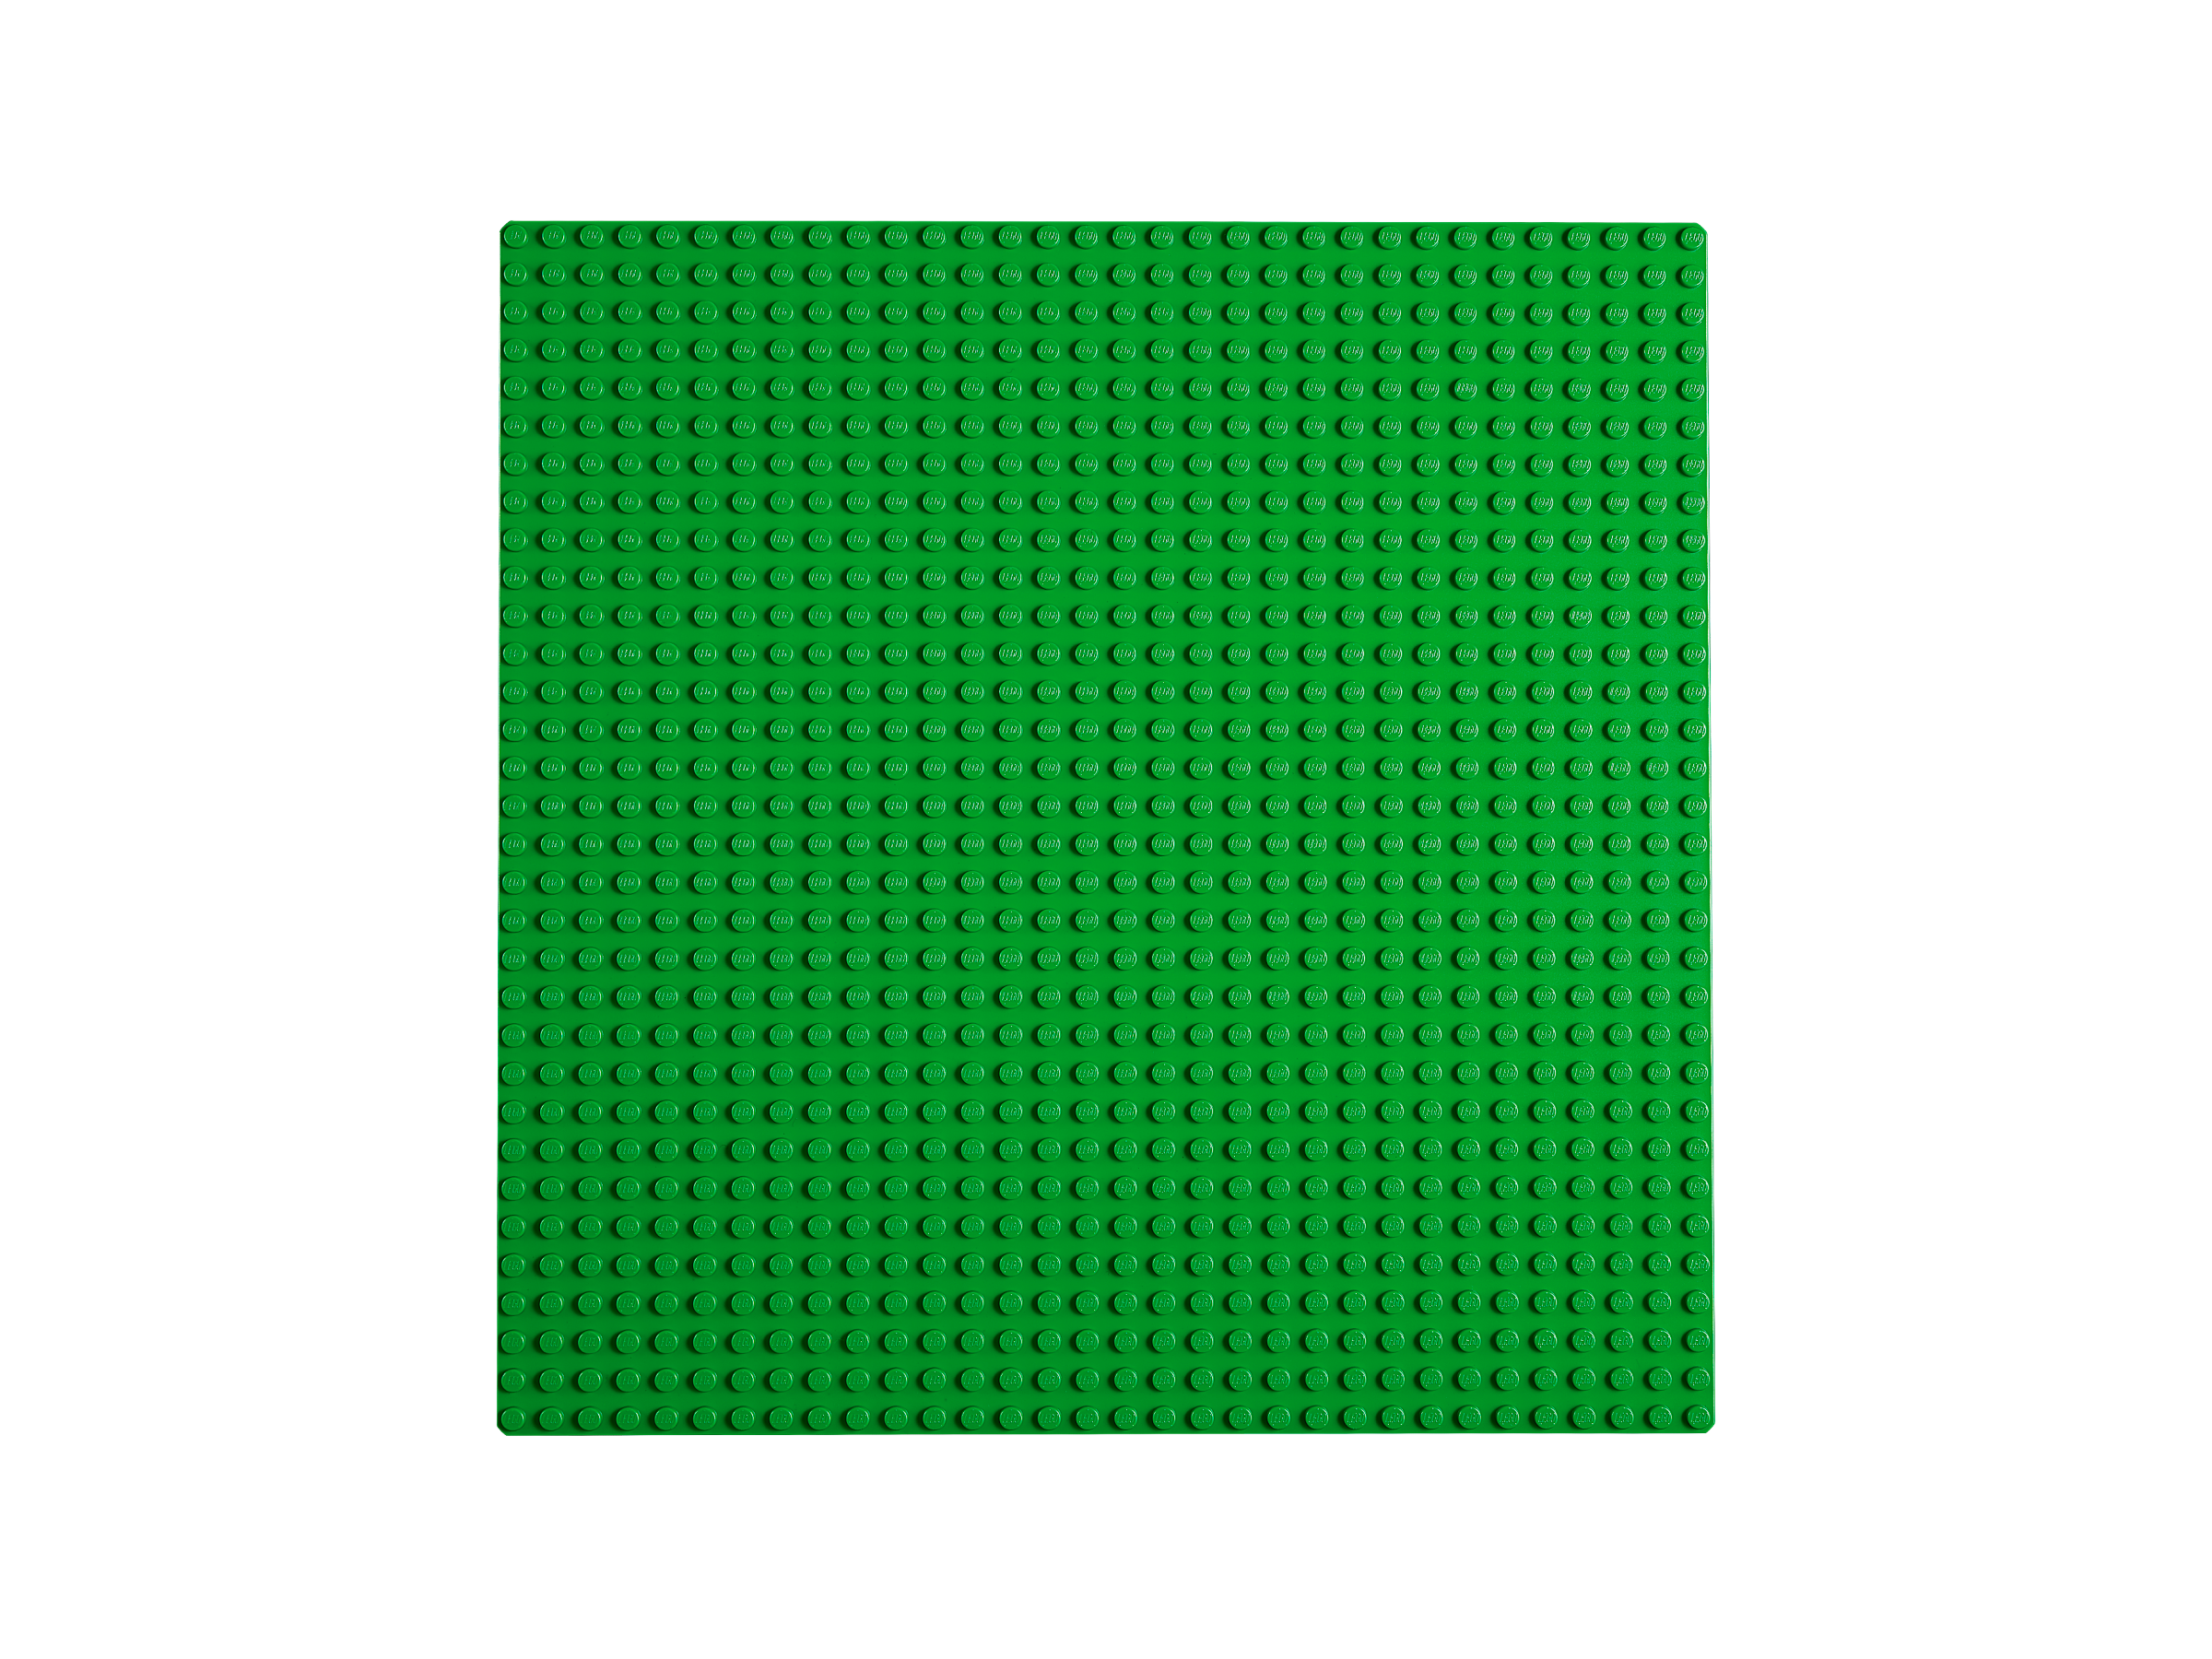 LEGO Classic Green Baseplate, Square 32x32 Stud Foundation to Build, Play,  and Display Brick Creations, Great for Grassy Nature Landscapes, 11023